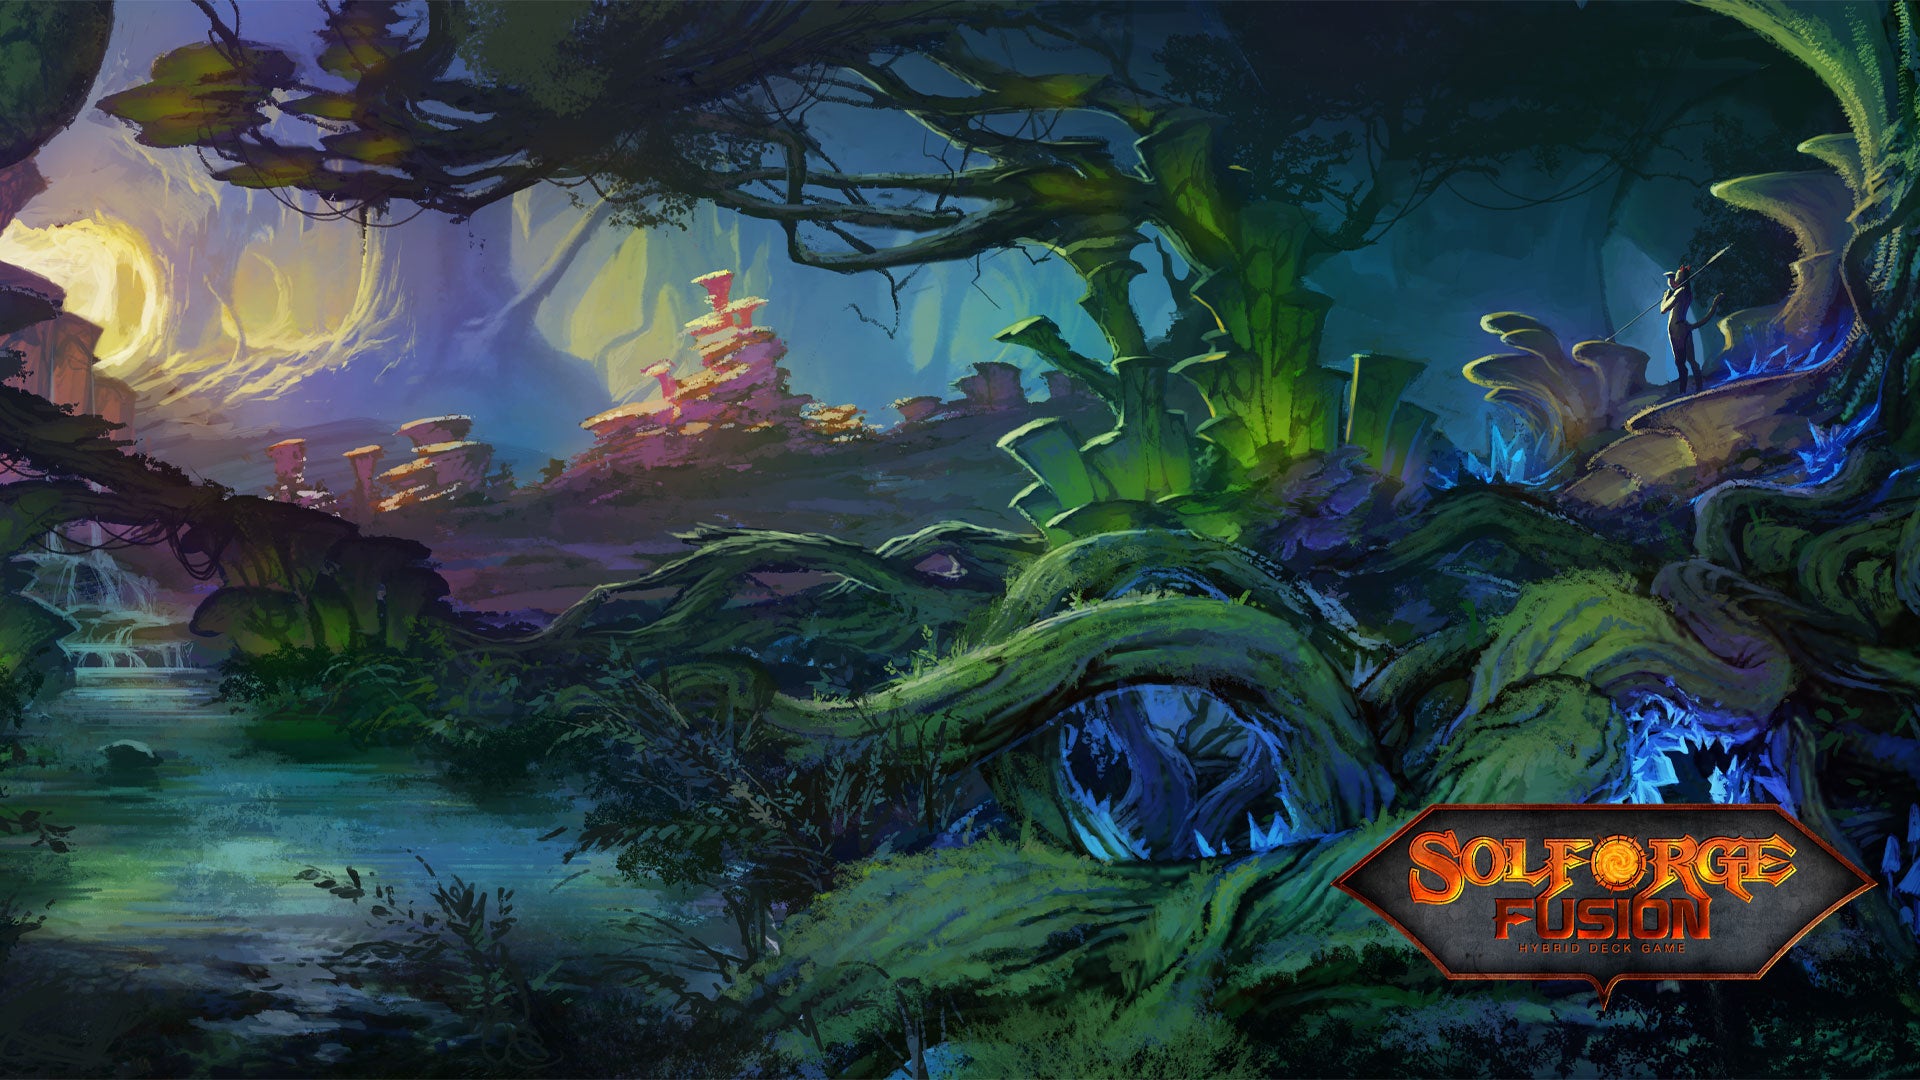 Load video: SolForge Fusion Trailer